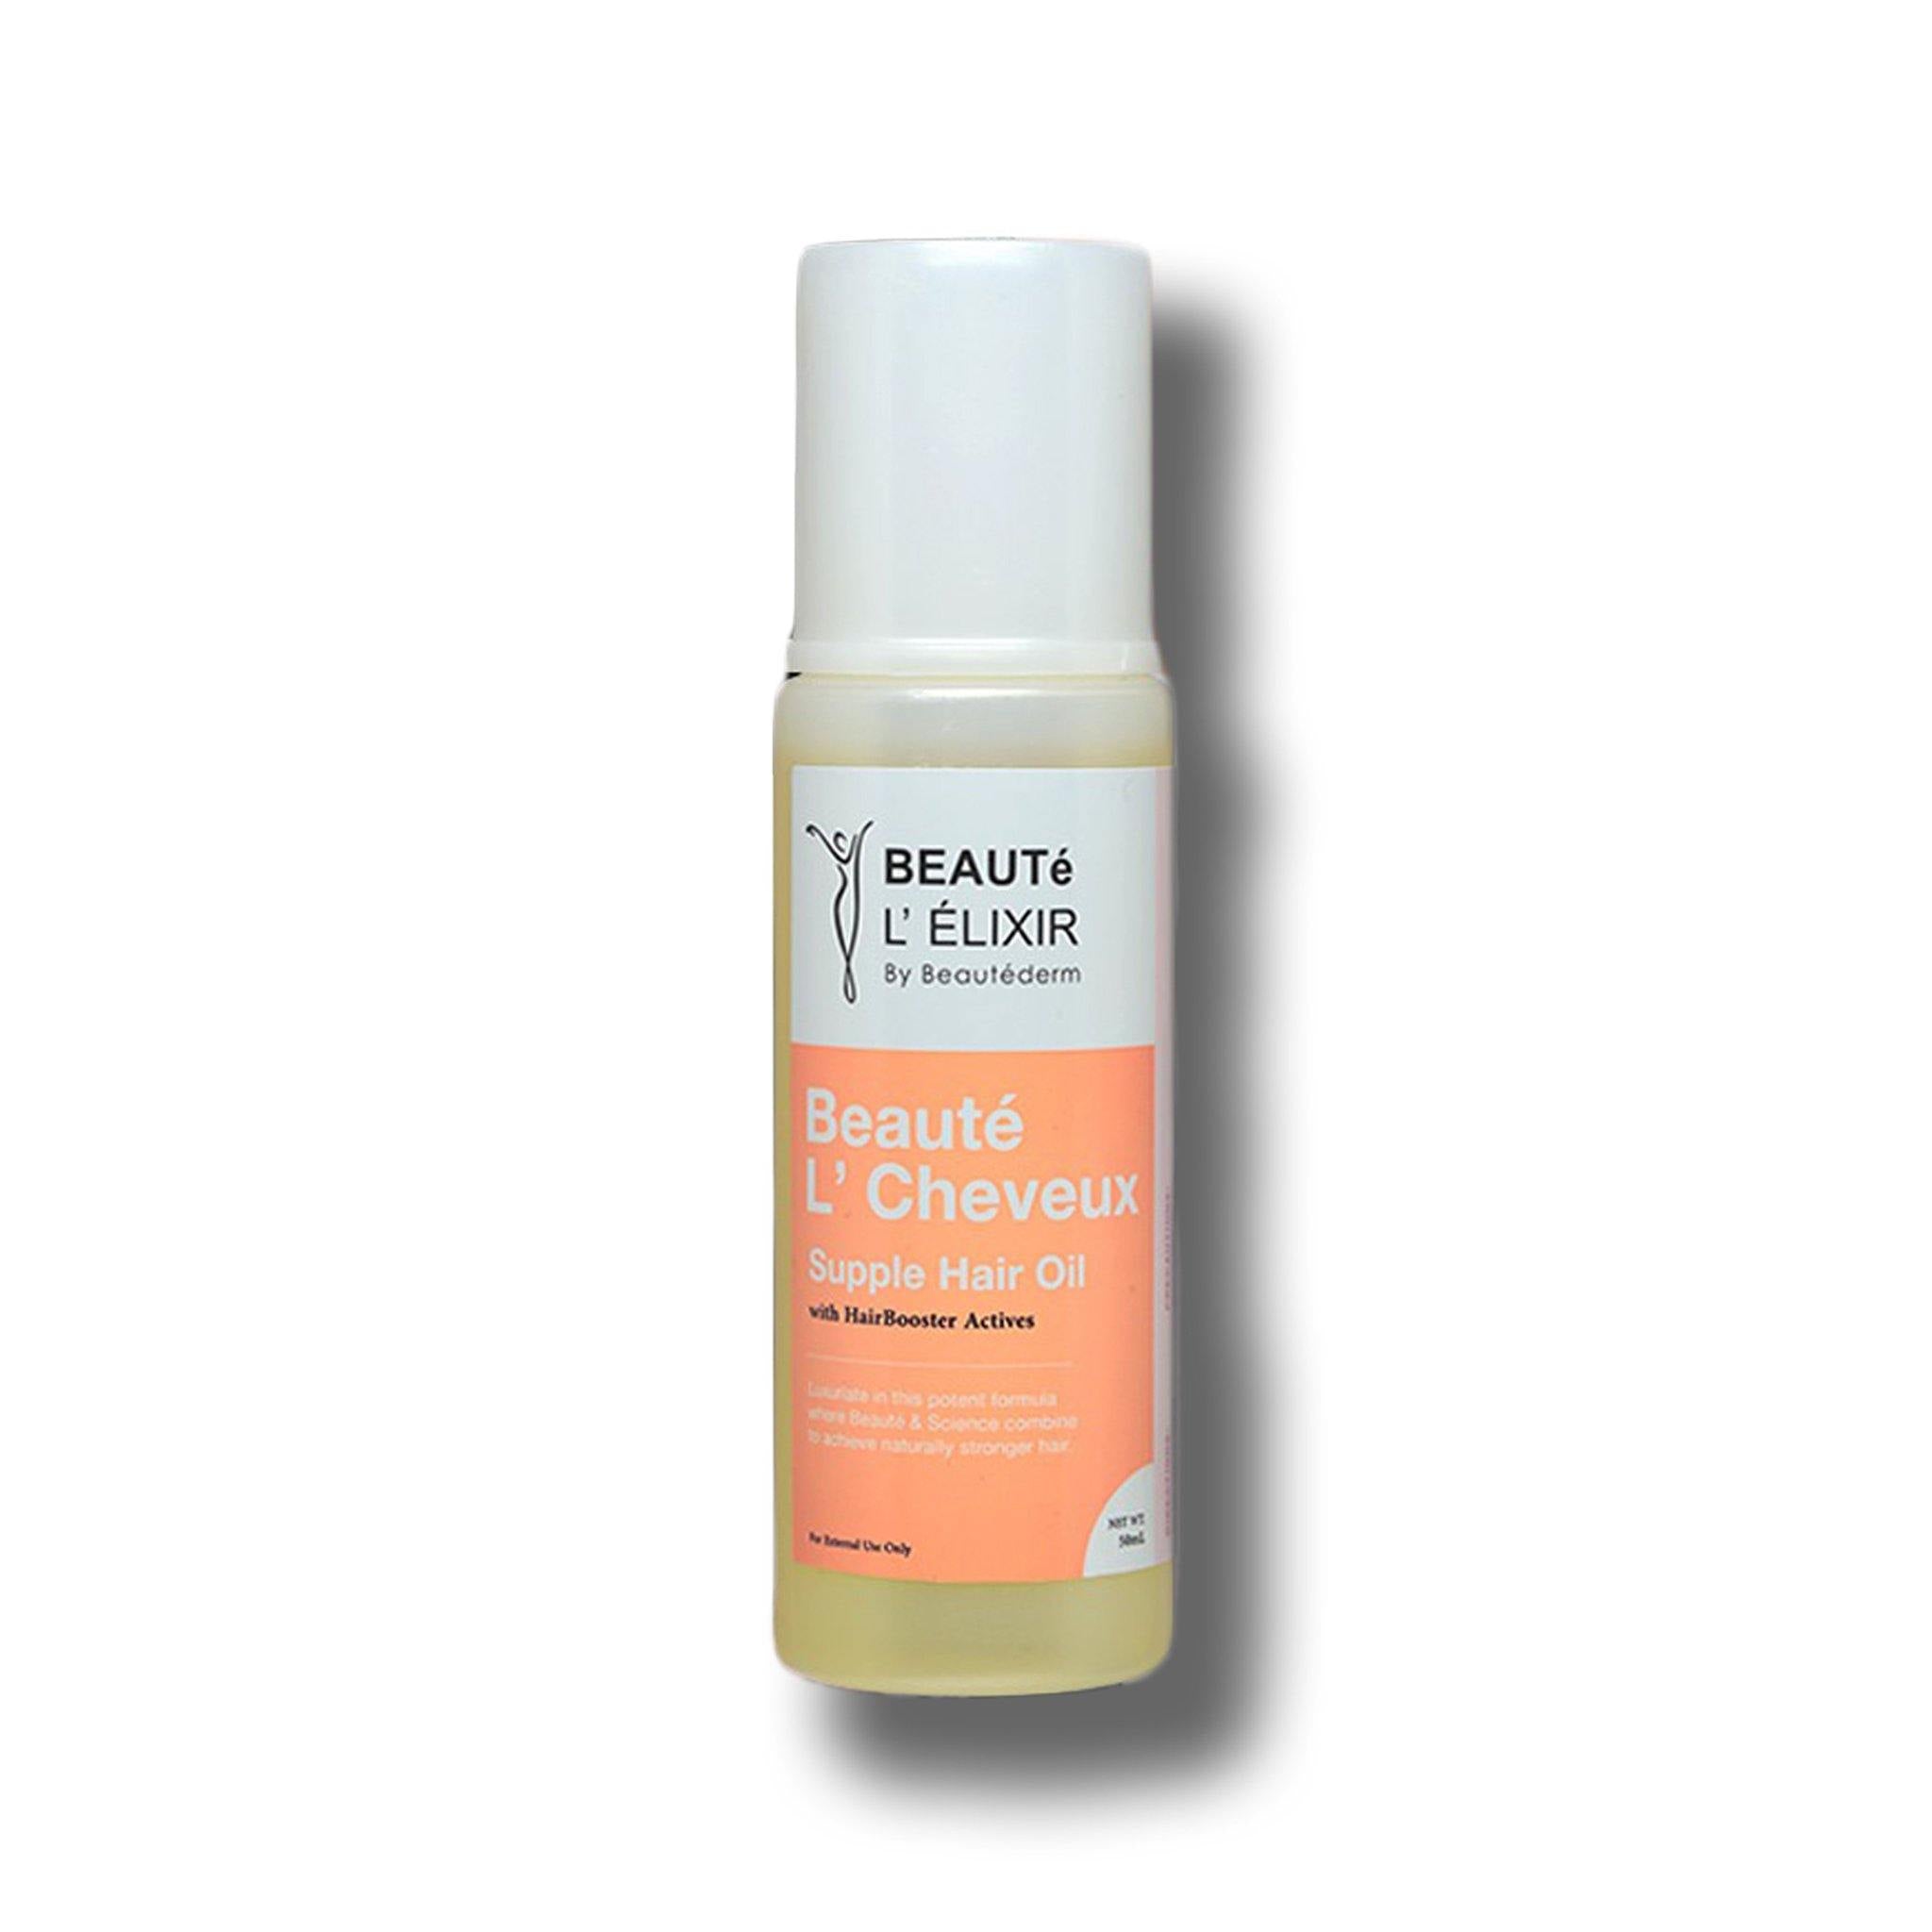 Beaute L' Cheveux Supple Hair Oil with Hair Booster Actives, 50ml, by Beaute L' Elixir by Beautederm 